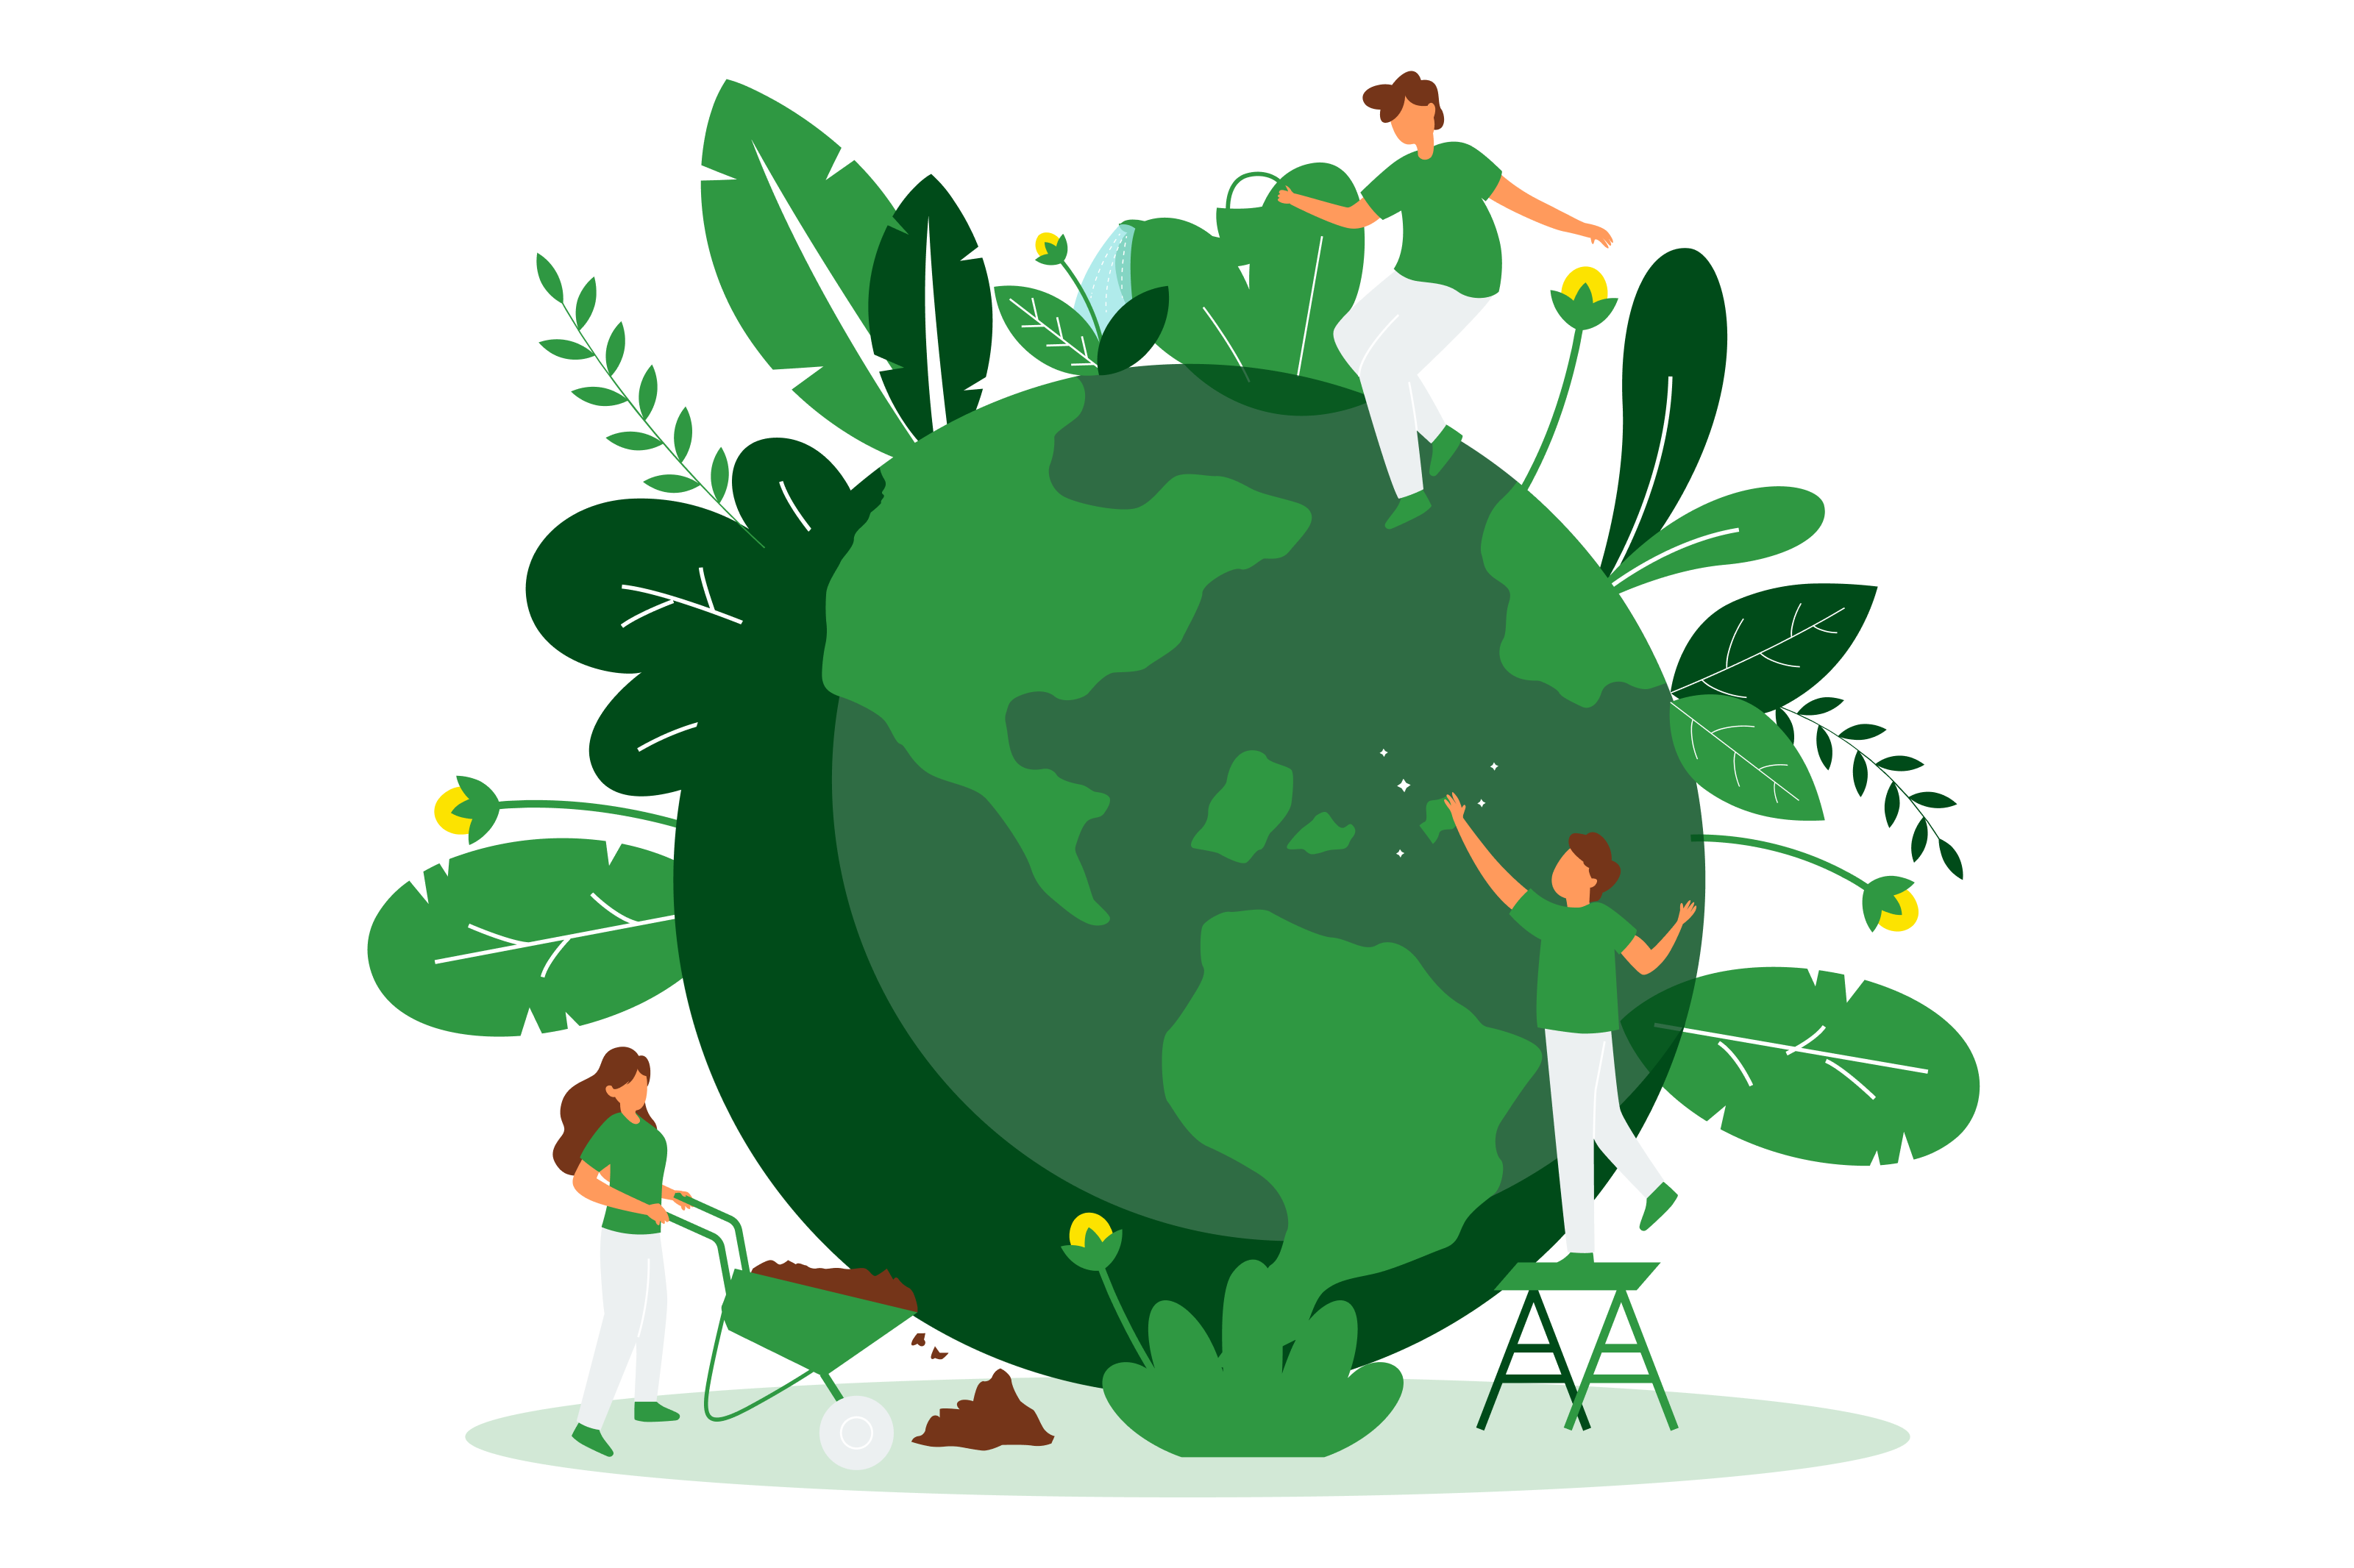 The image highlights the concept that sustainability is about balancing the needs of the environment, society, and economy in a way that meets the needs of the present without compromising the ability of future generations to meet their own needs. The image suggests that true sustainability requires a holistic approach that takes into account the interdependence of these three spheres, and that sustainable solutions must be both practical and equitable. The image serves as a reminder that sustainability is not just about protecting the environment, but also about creating a better world for all.